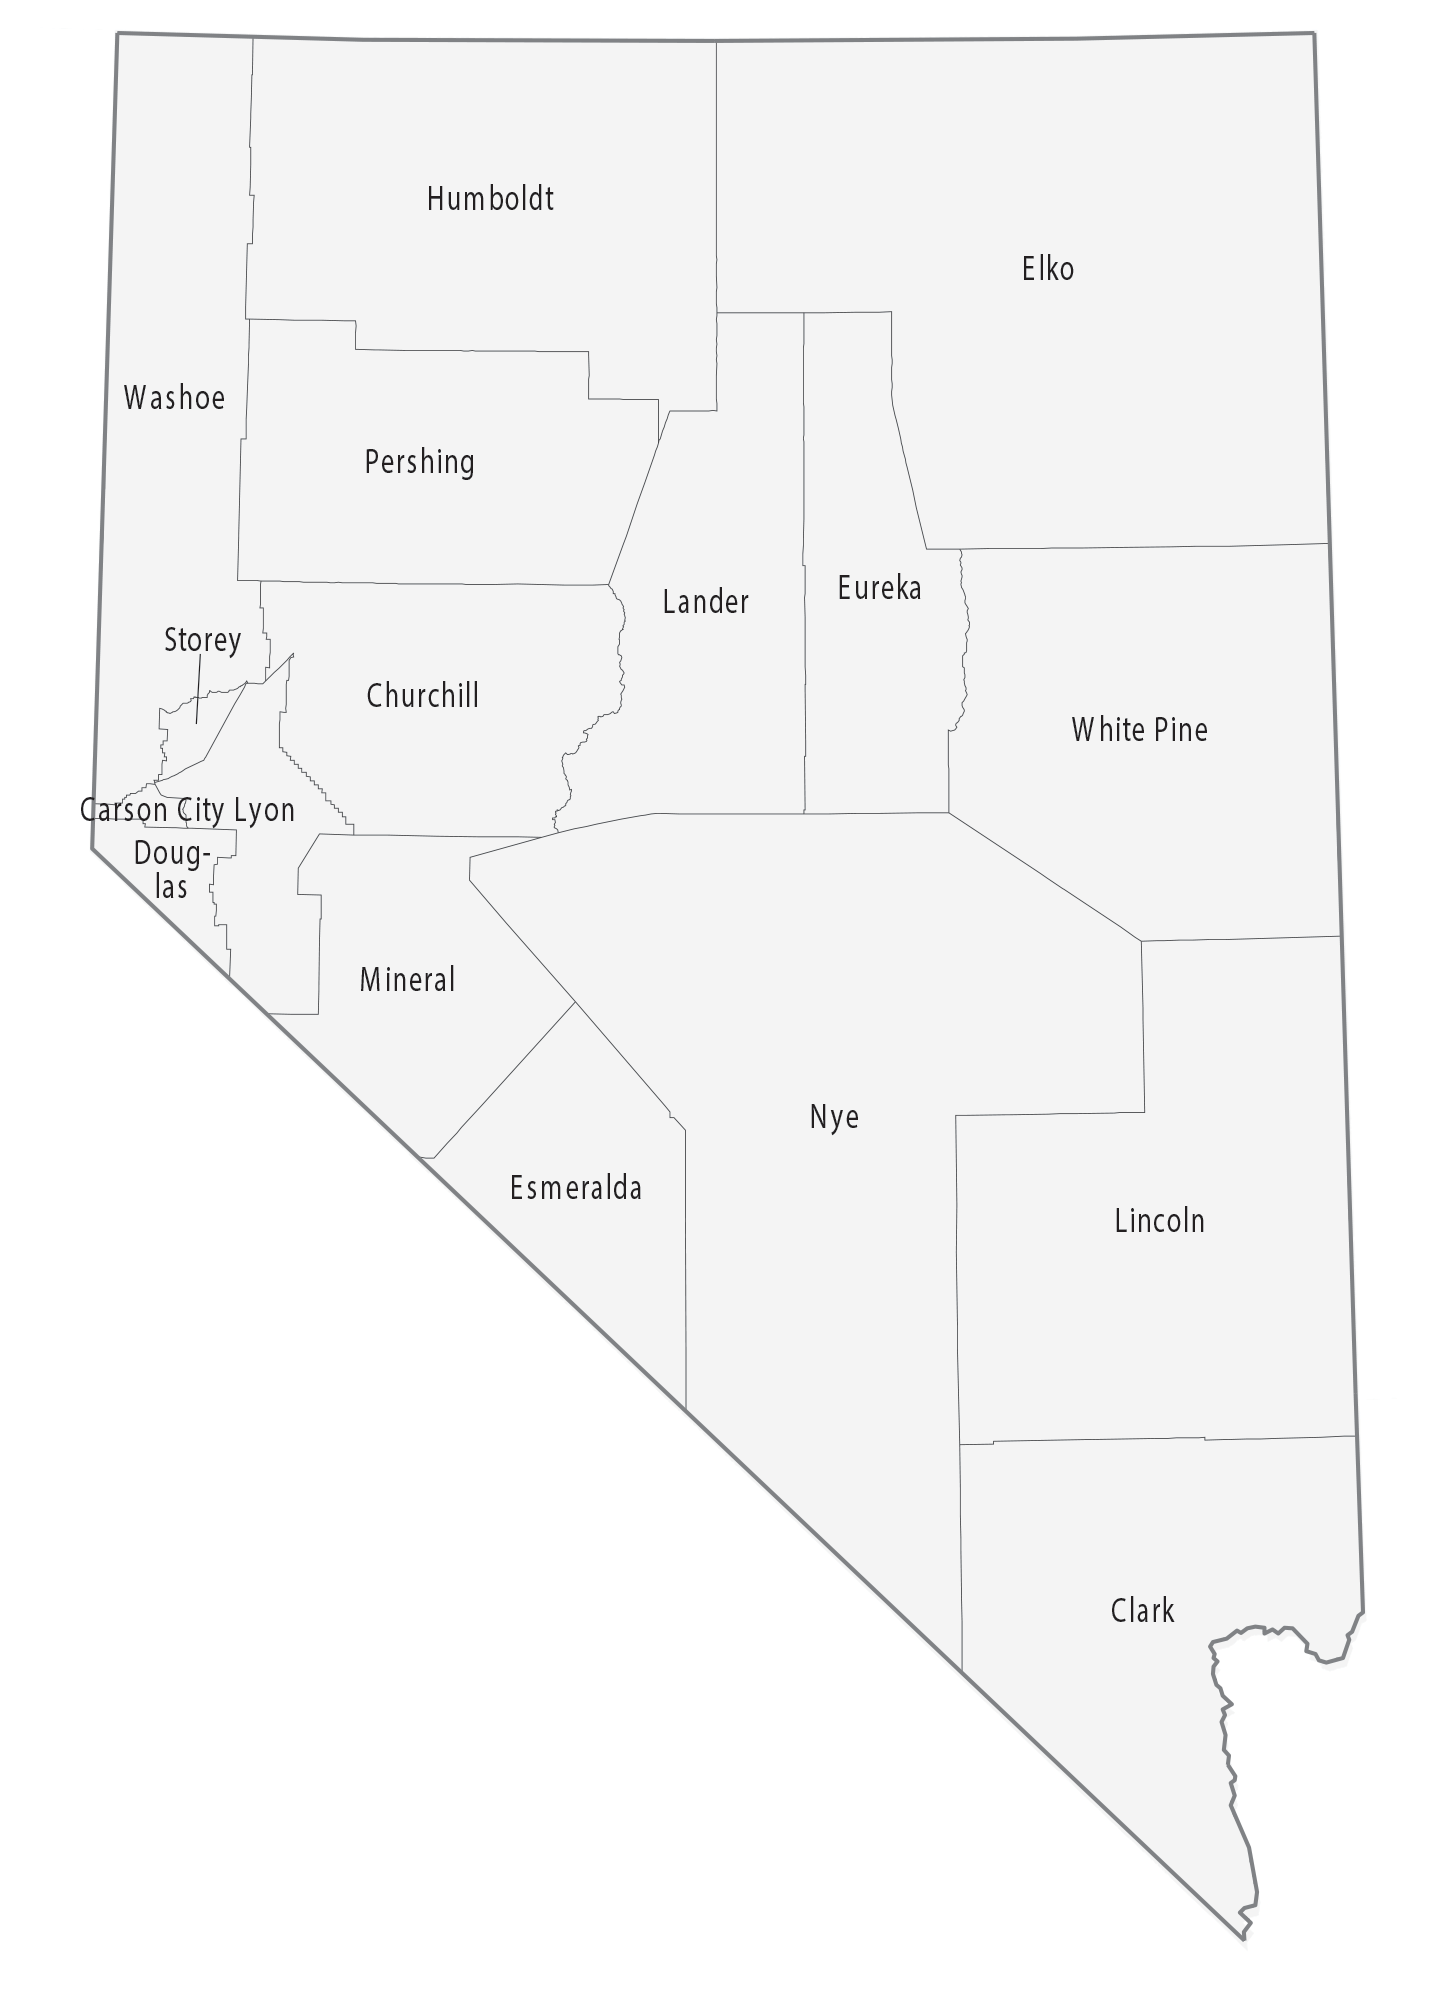 Nevada State Map With Counties - Alvina Margalit